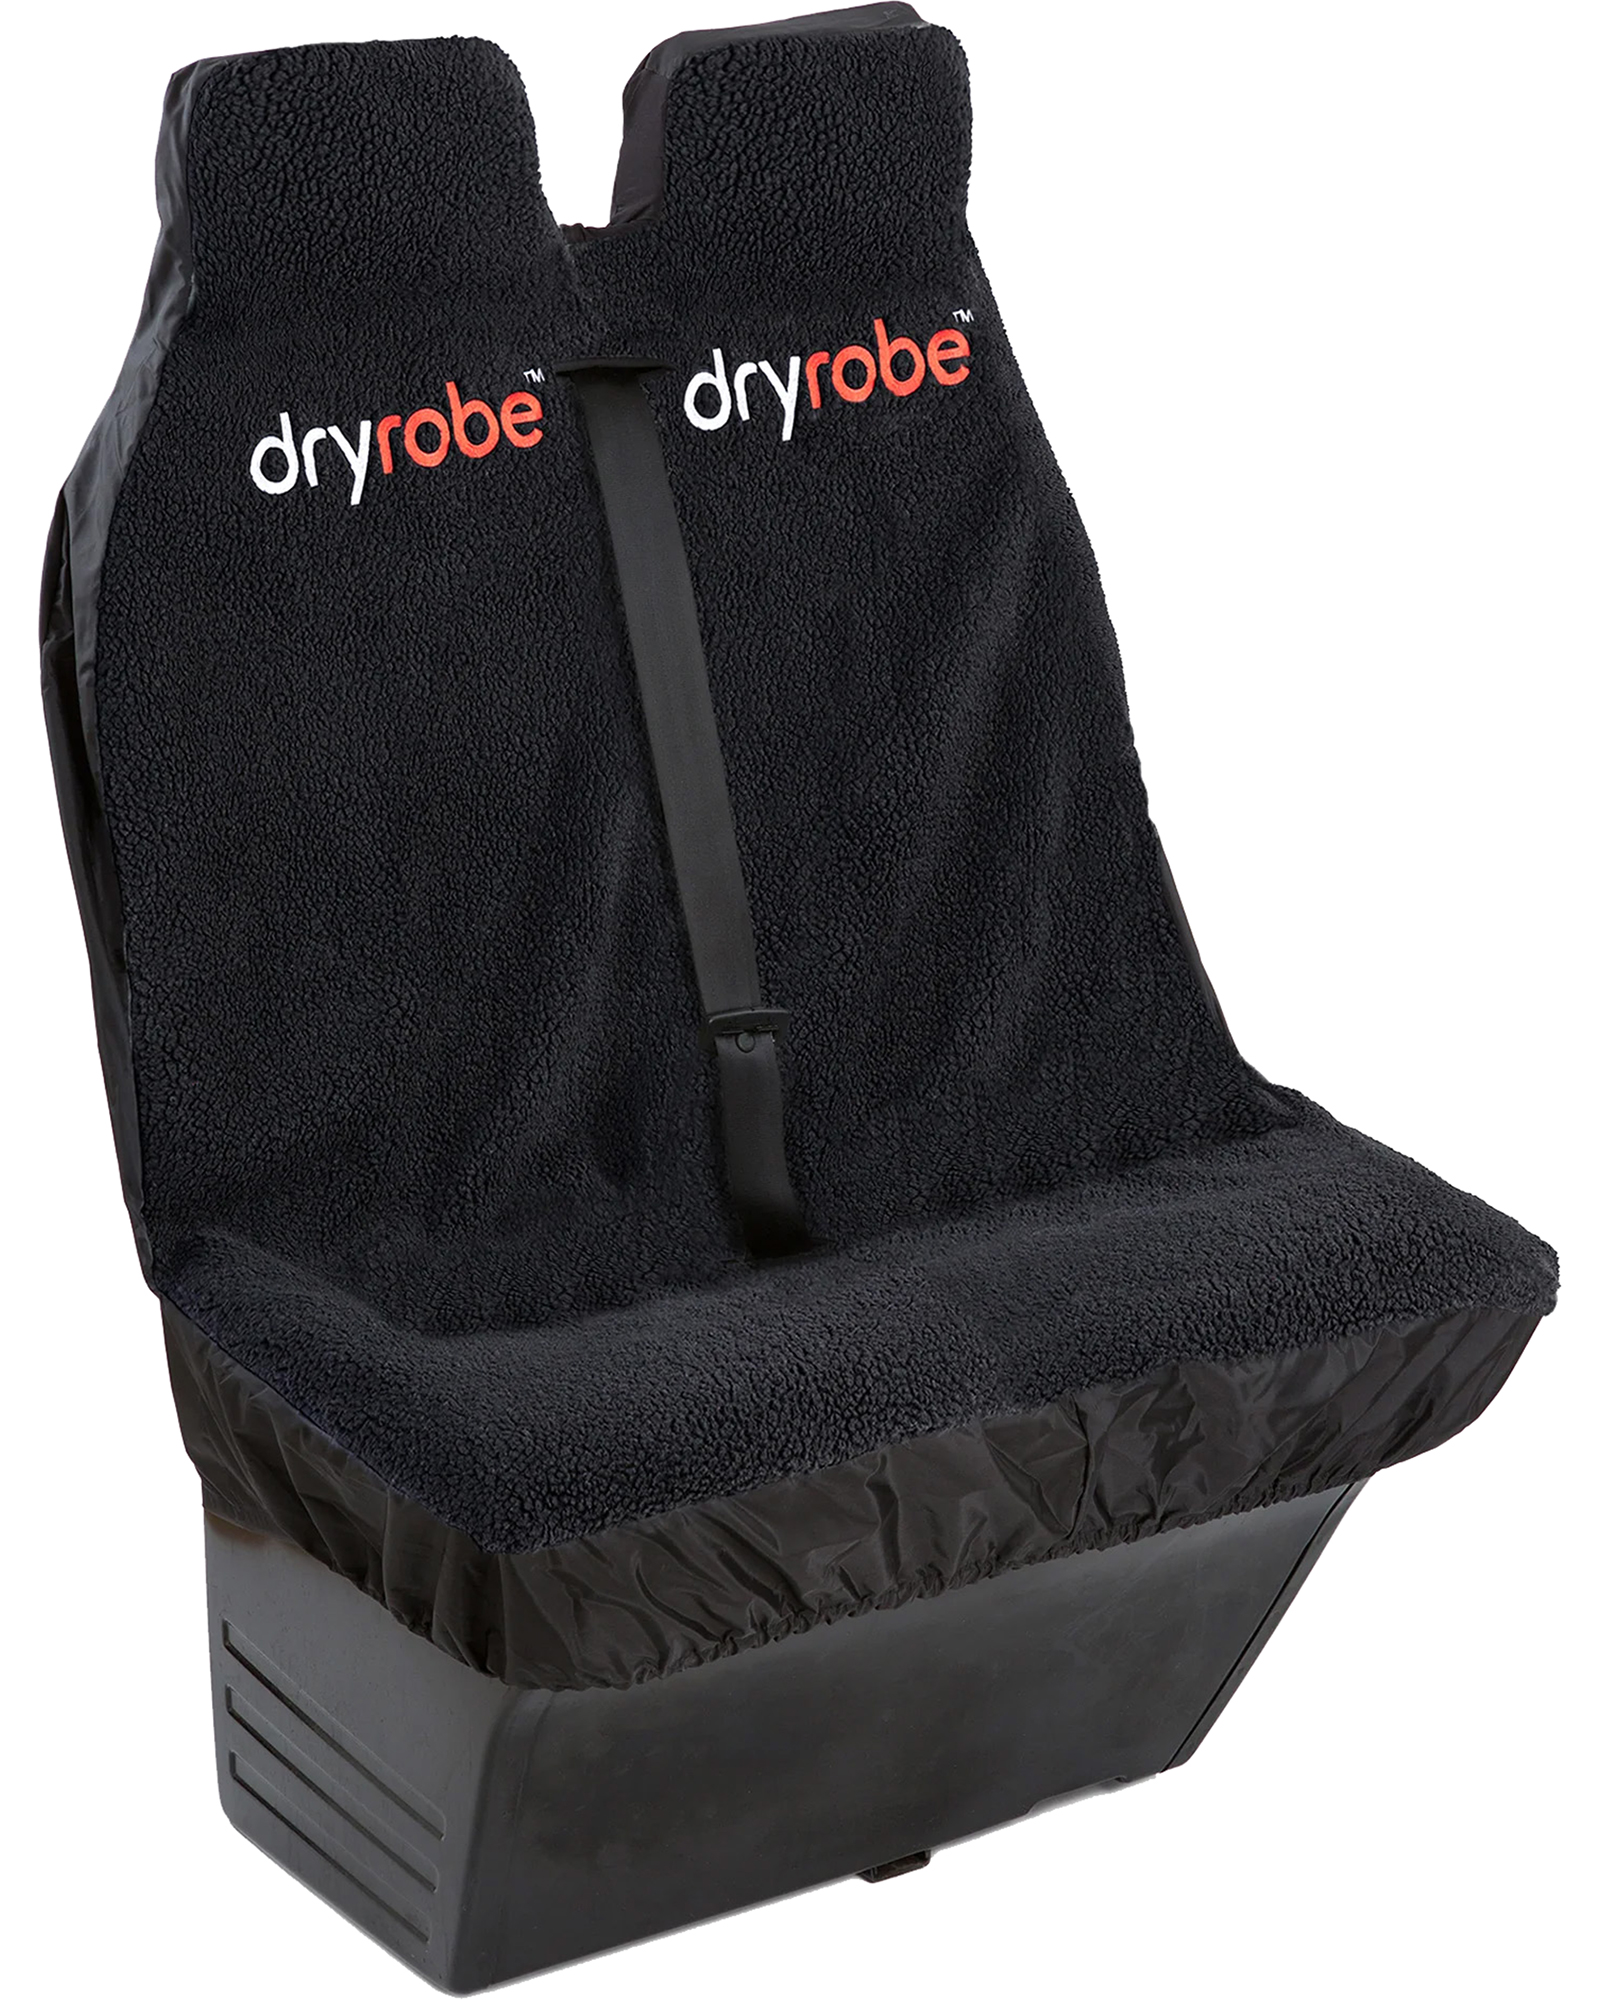 Dryrobe Car Seat Cover   Double - black